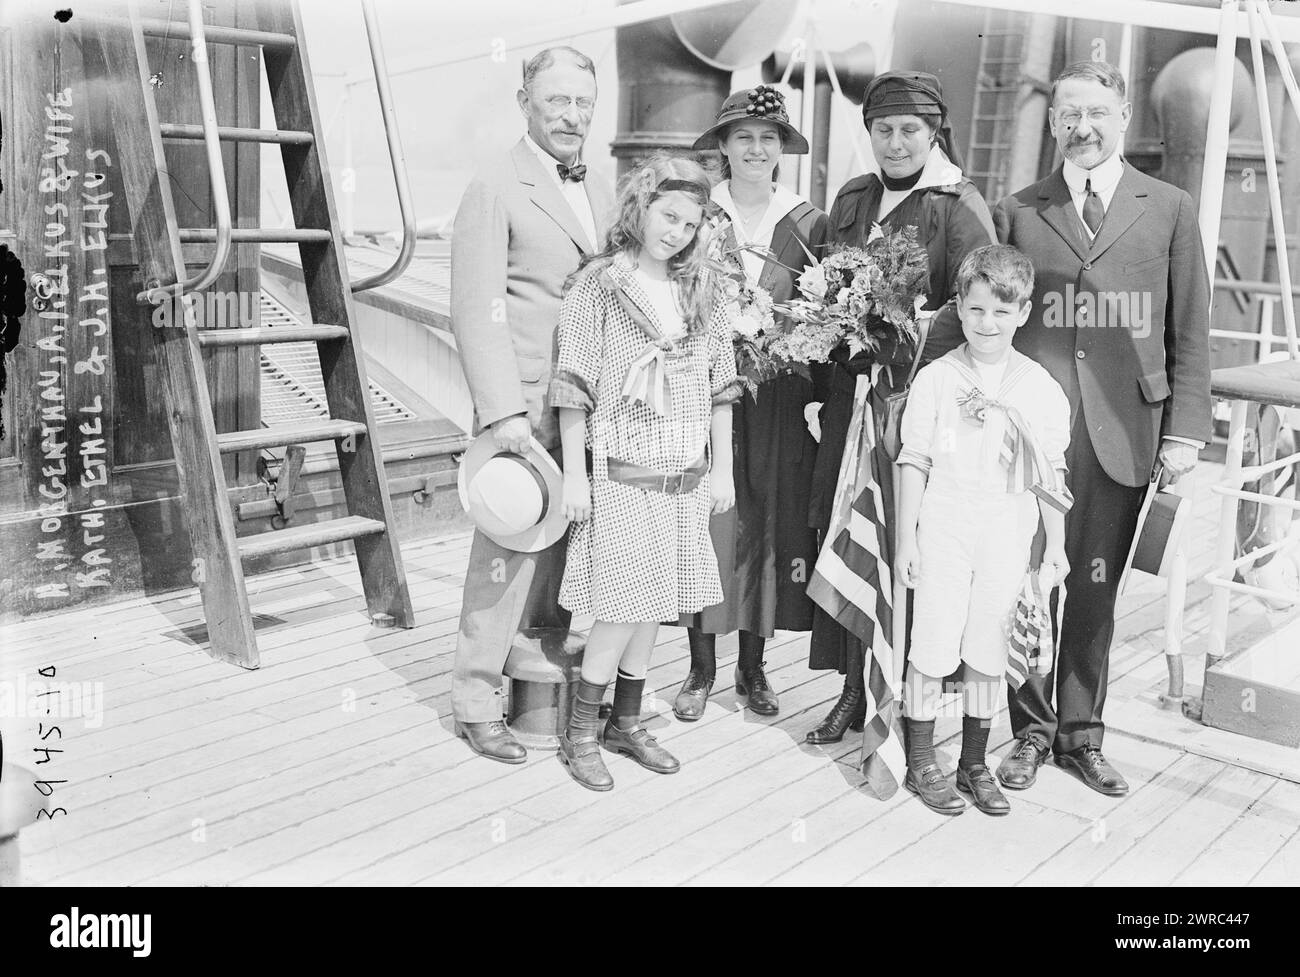 H. Morgenthau, A.I. Elkus & wife, Kath., Ethel & J.H. Elkus, Photograph shows U.S. Ambassador to the Ottoman Empire Abram I. Elkus (1867-1947), leaving New York on August 17, 1916 on the ocean liner Oscar II with his wife Gertrude Hess Elkus, daughters Ethel J. and Katharine, and his son James Hess Elkus. Previous ambassador Henry Morgenthau (1856-1946) stands with them., between ca. 1915 and ca. 1920, Glass negatives, 1 negative: glass Stock Photo